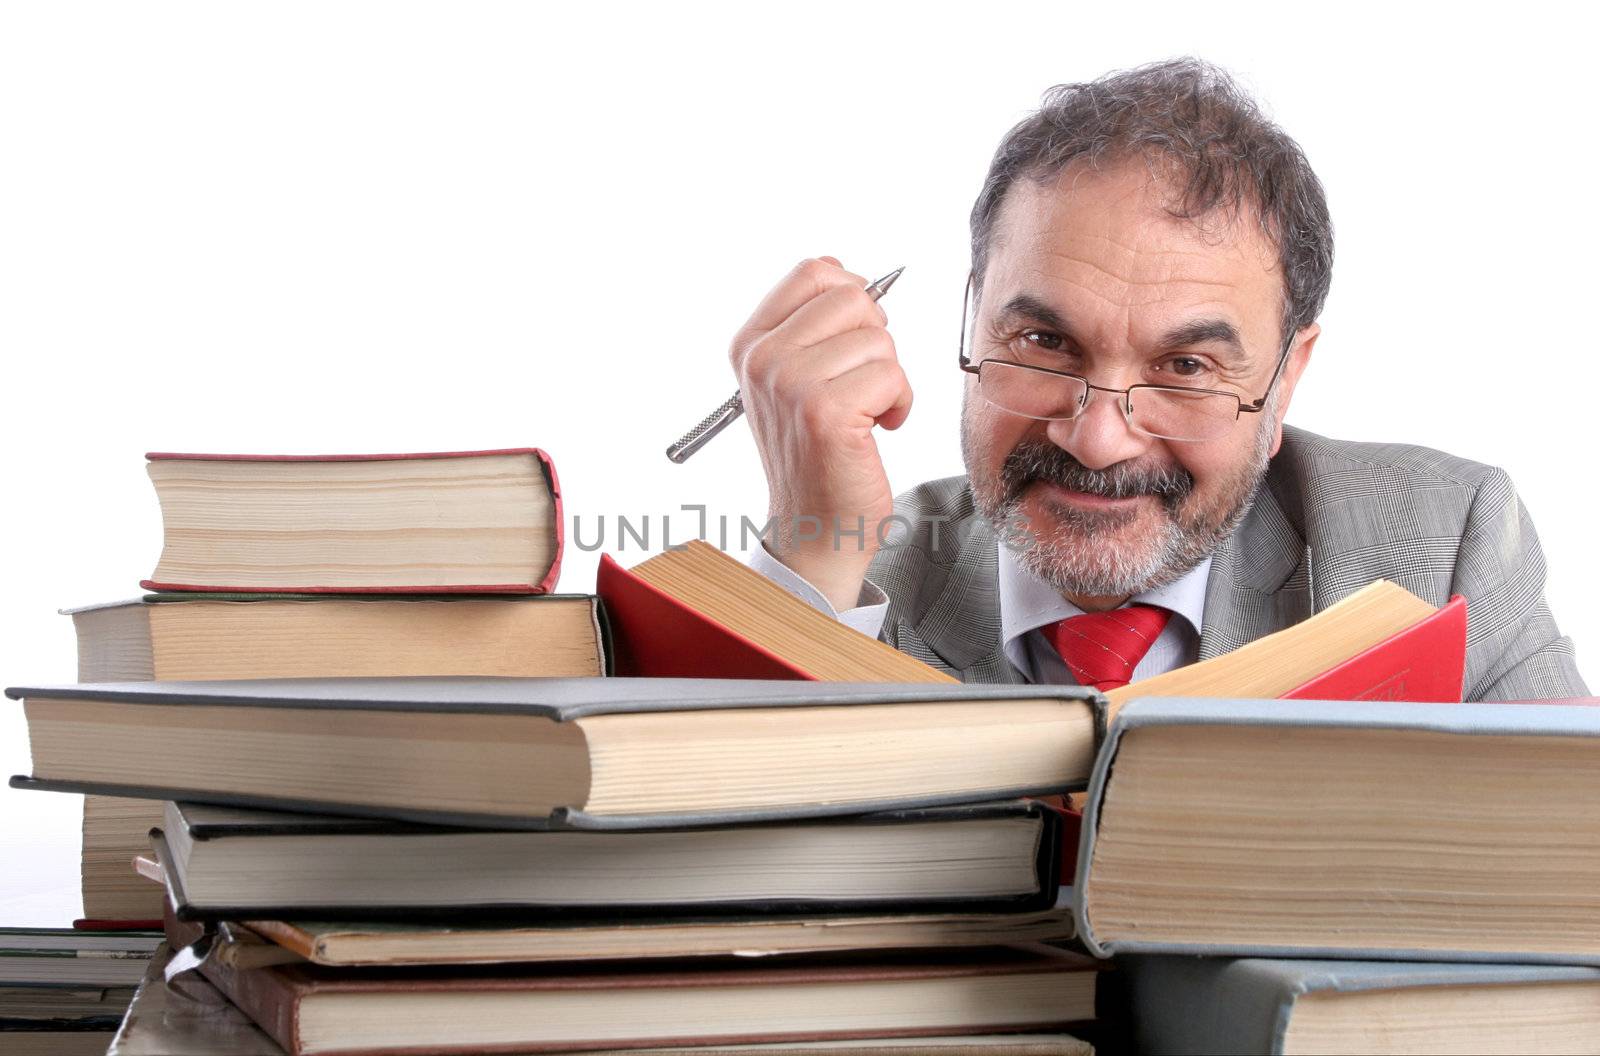 Single male is sitting behind a pile of books. Looking at camera, smiling. Holding a pen in his hand